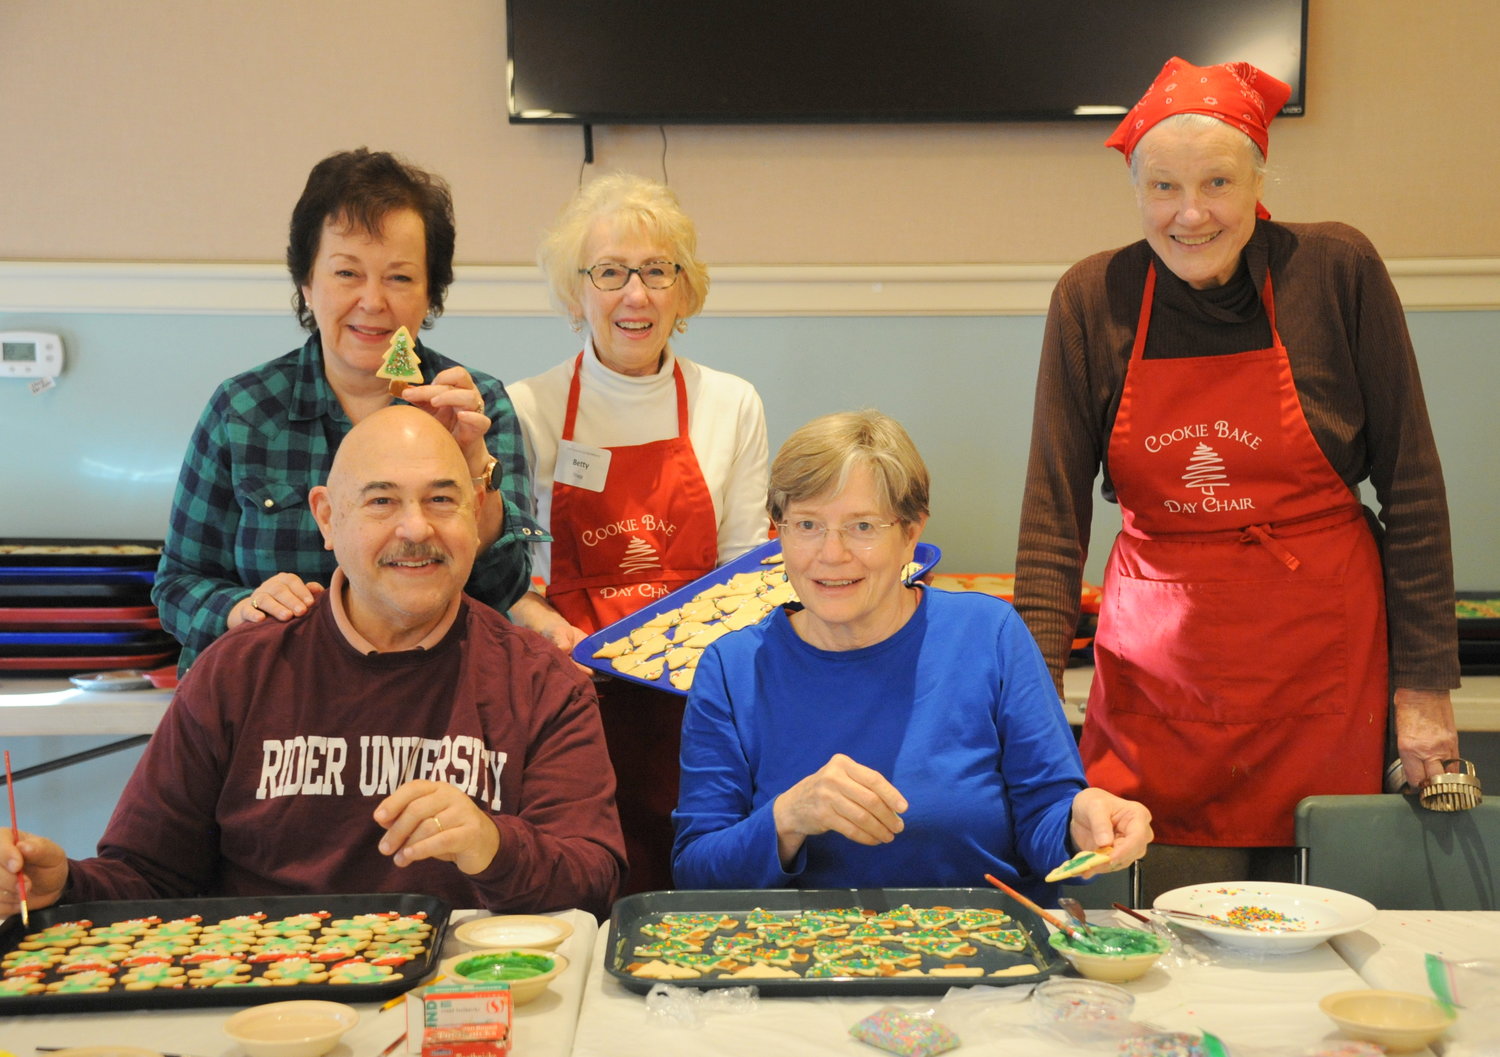 The big kids decorating cookies were Frank Levy, Mary Muth, in front, and Lisa Landley, Betty Stag and Linda
Kenyon in back